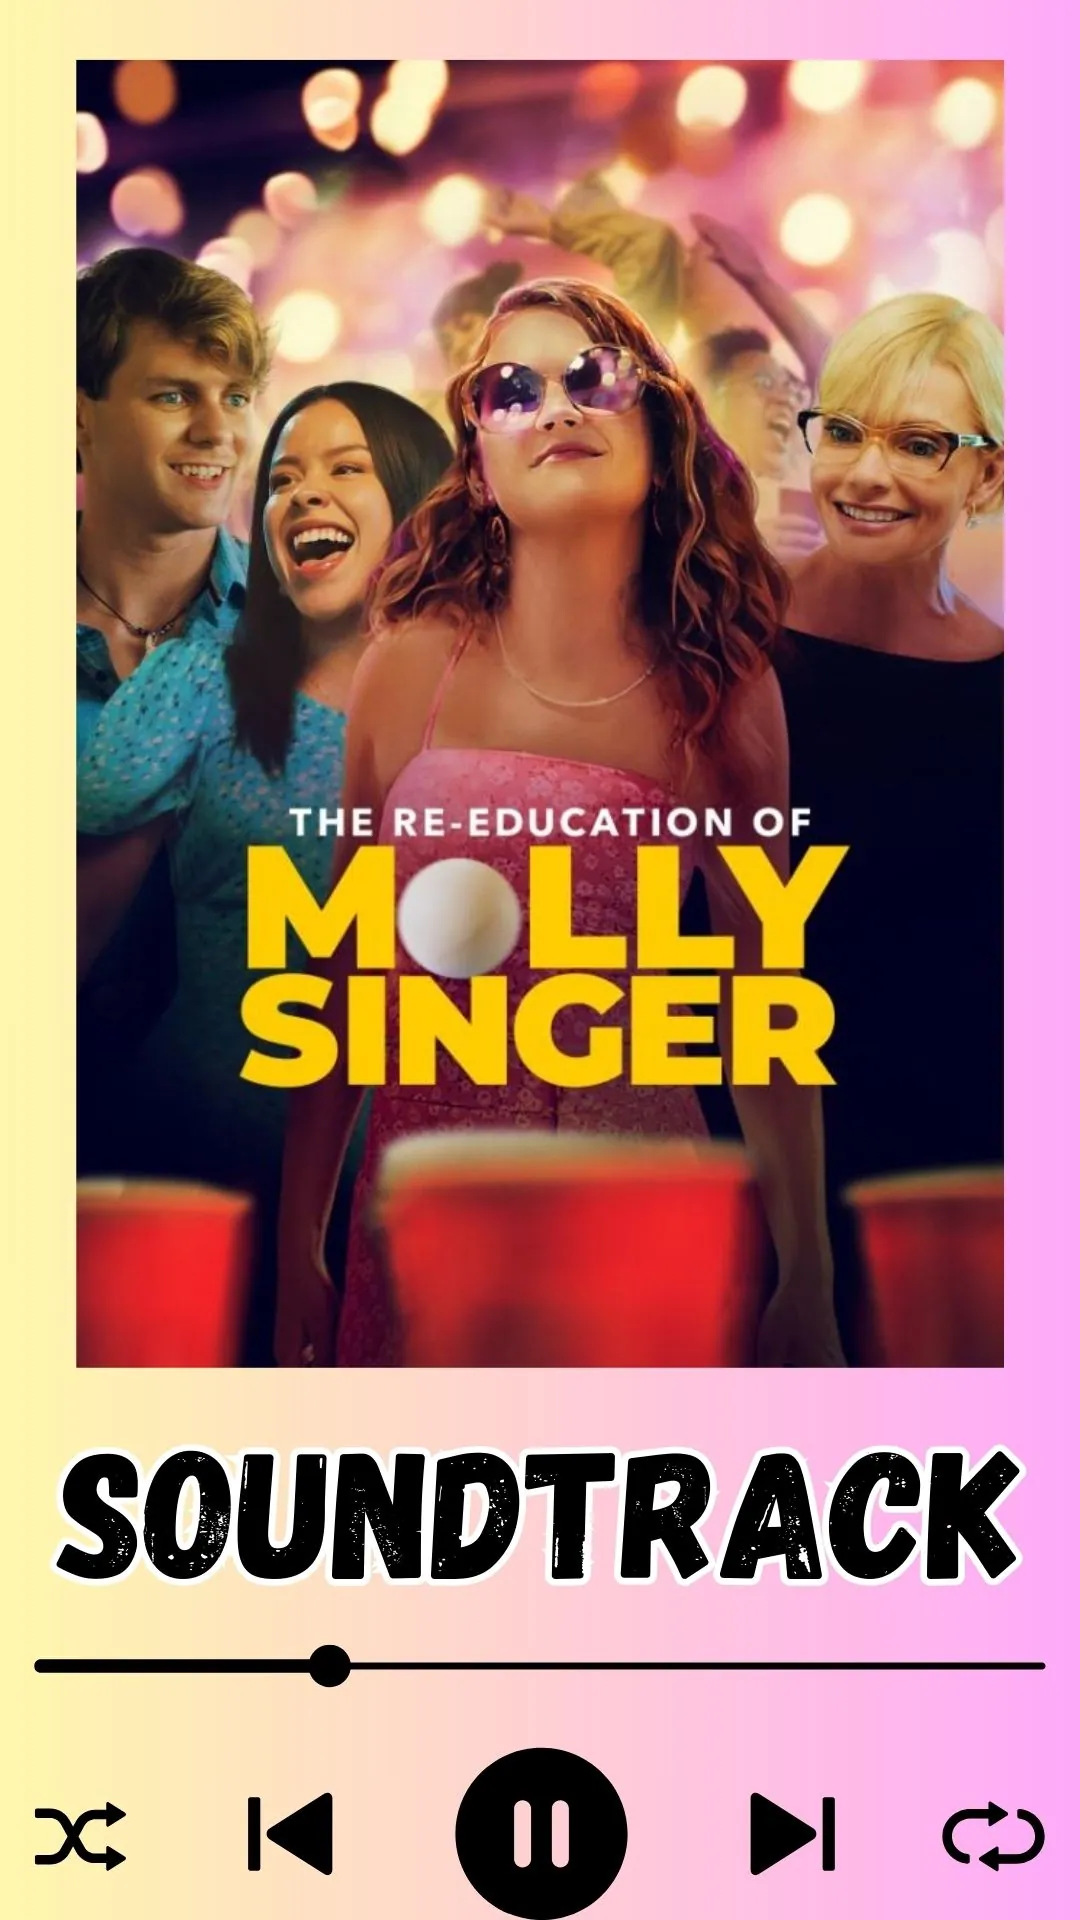 The Re-Education of Molly Singer Soundtrack